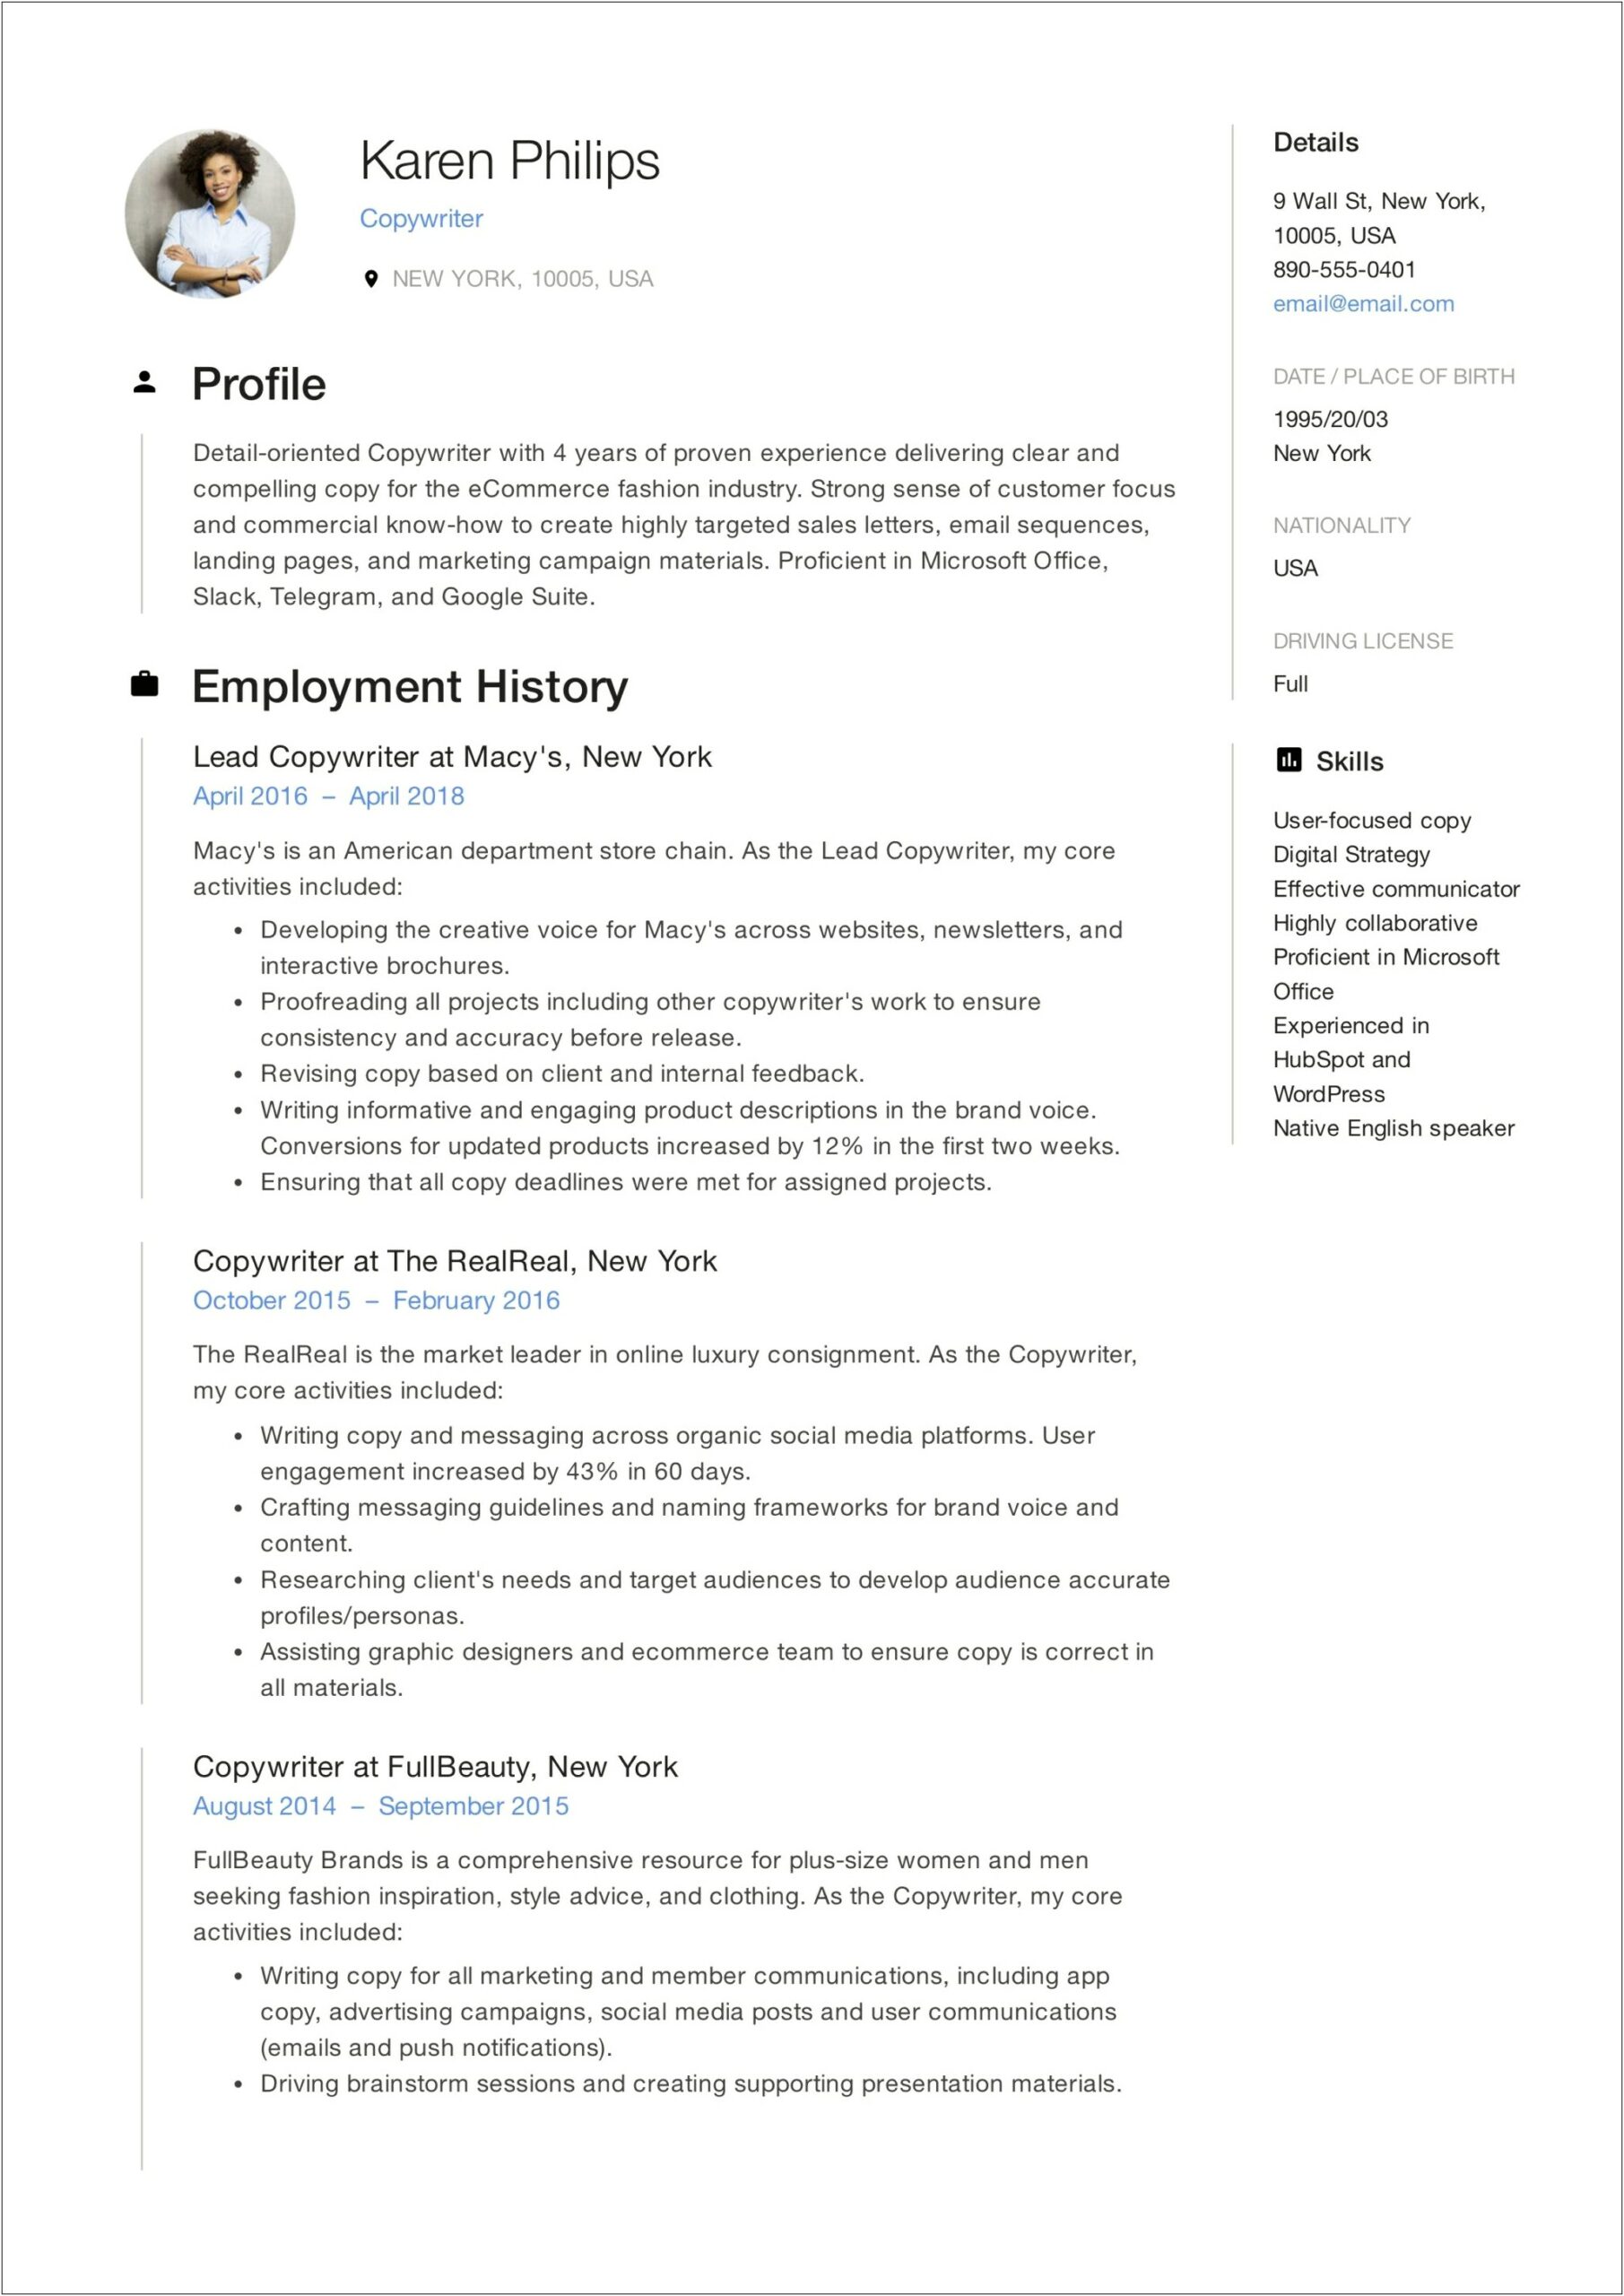 Resume Objective Out Of Date